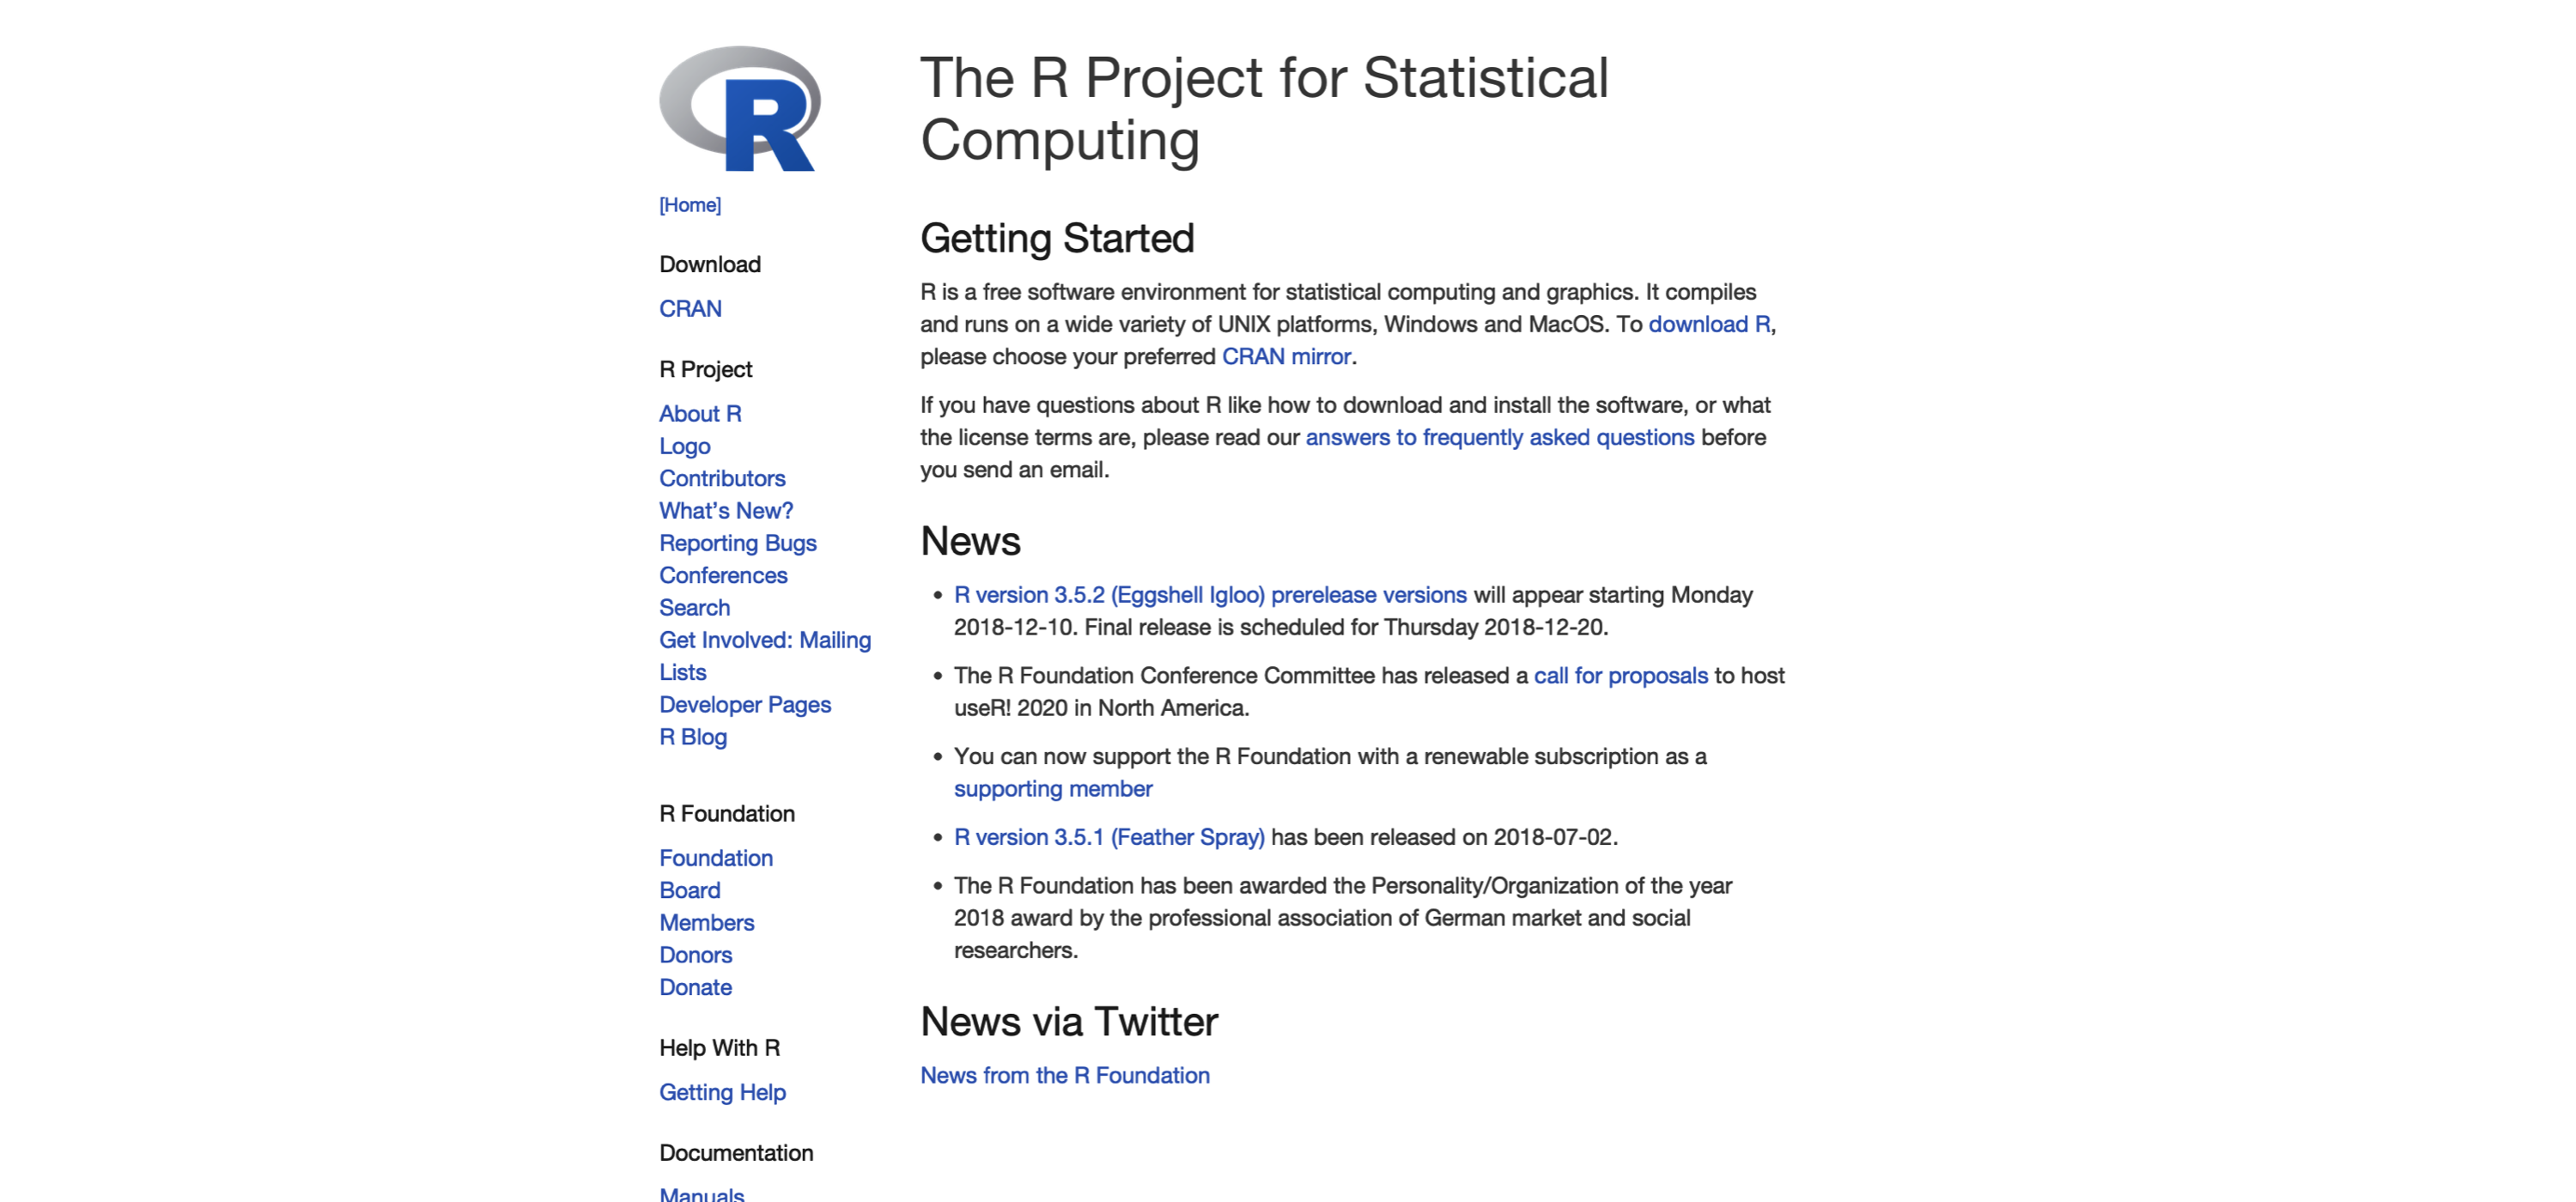 The R Project for Statistical Computing